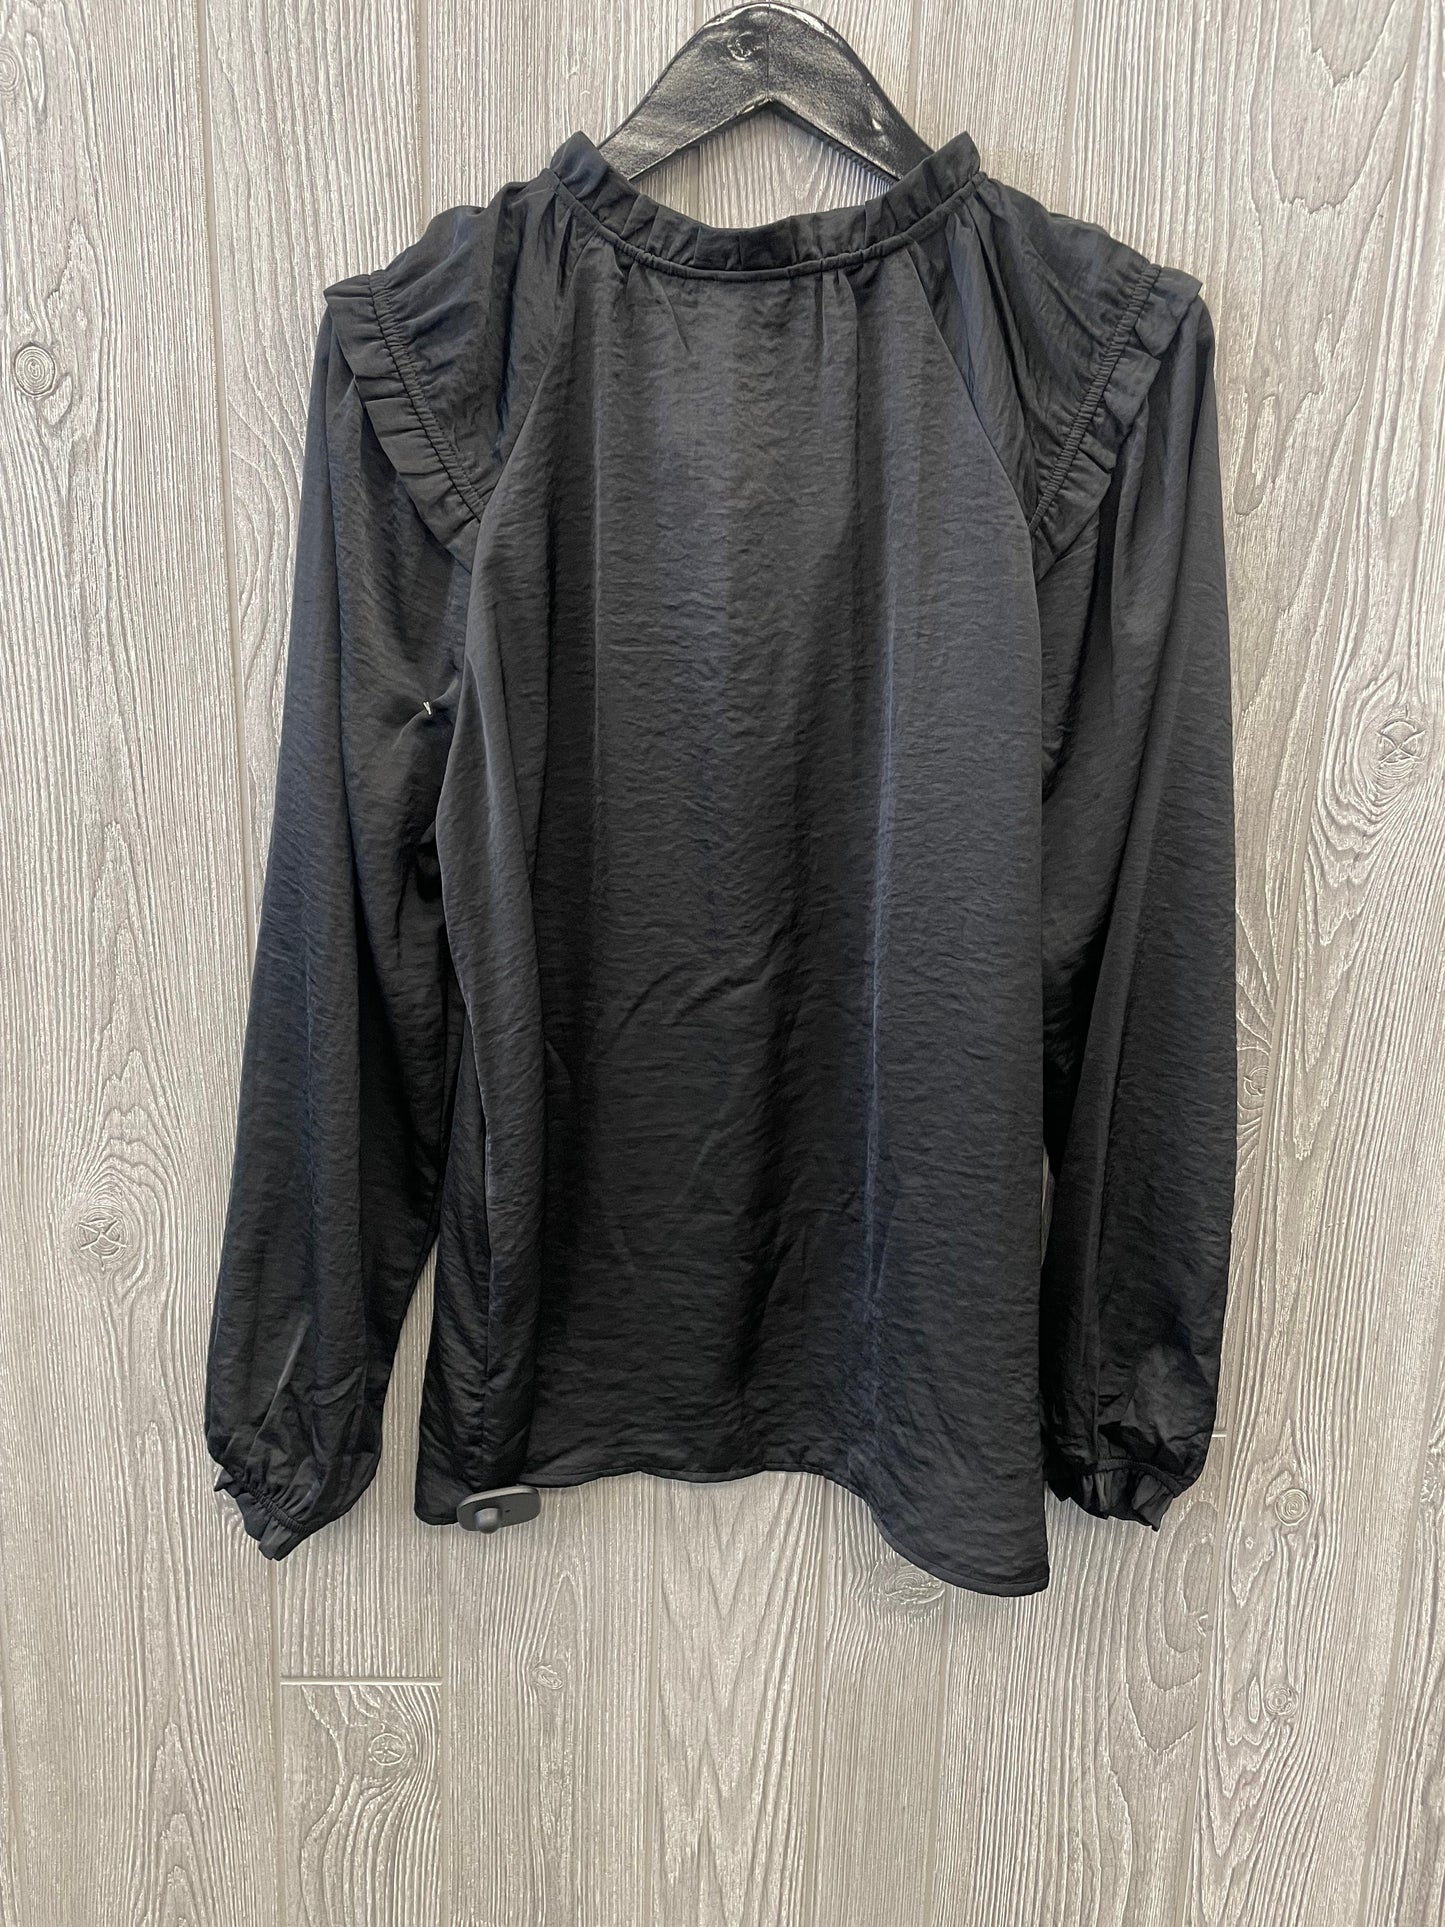 Top Long Sleeve By Knox Rose  Size: L